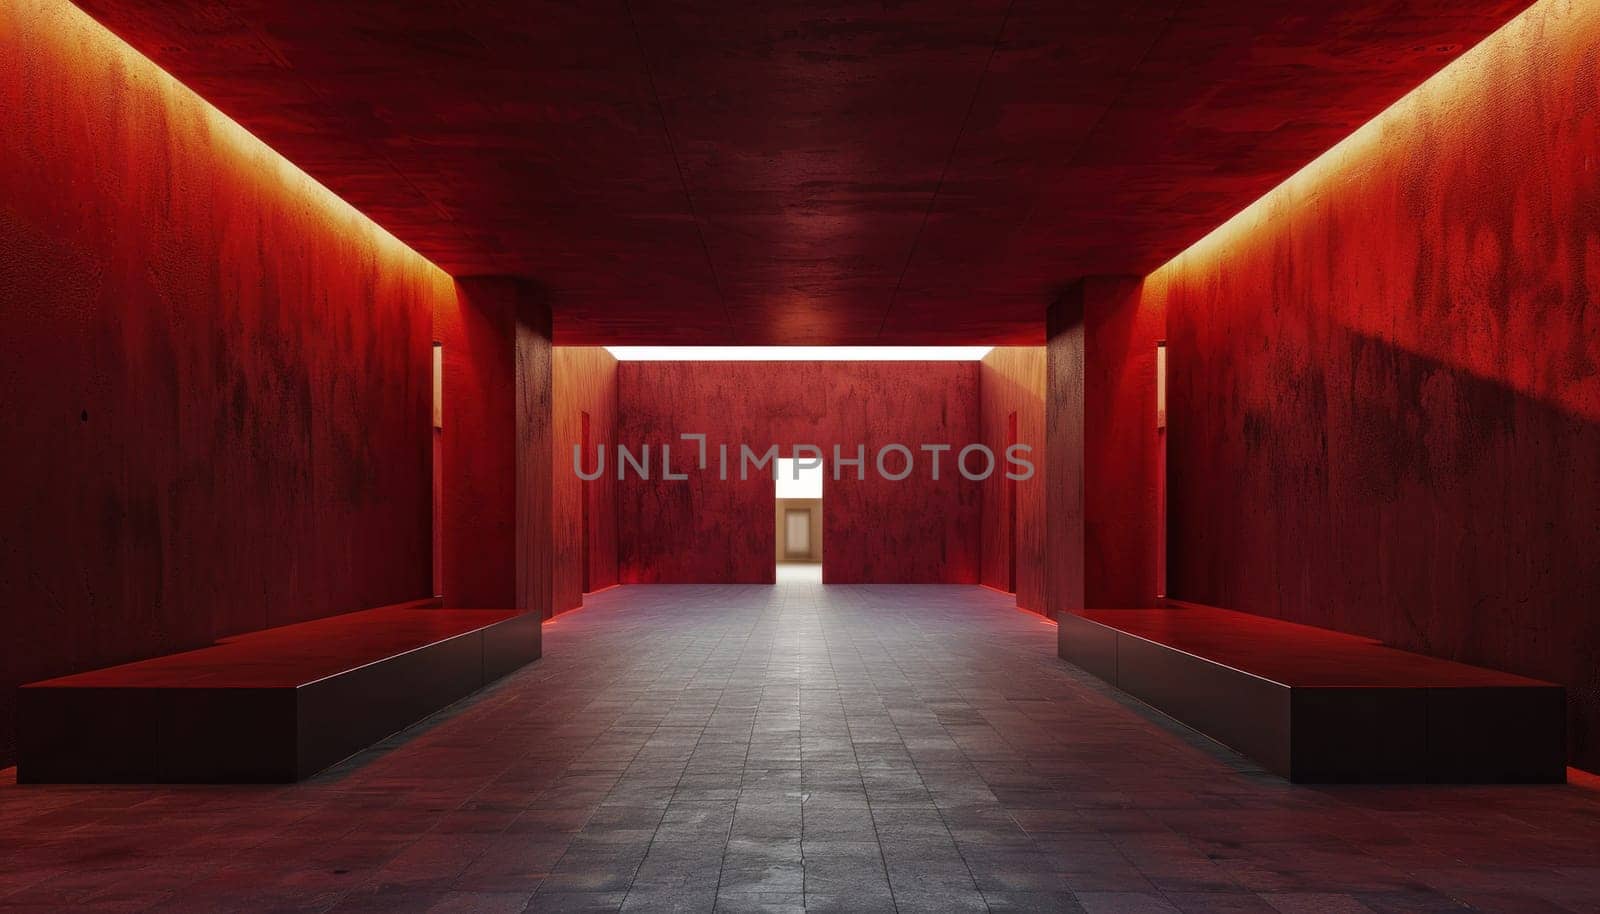 Long hallway with red walls and a bench in the middle of the room with a light shining down on it modern business traveler relaxing in stylish hallway with red walls and bench